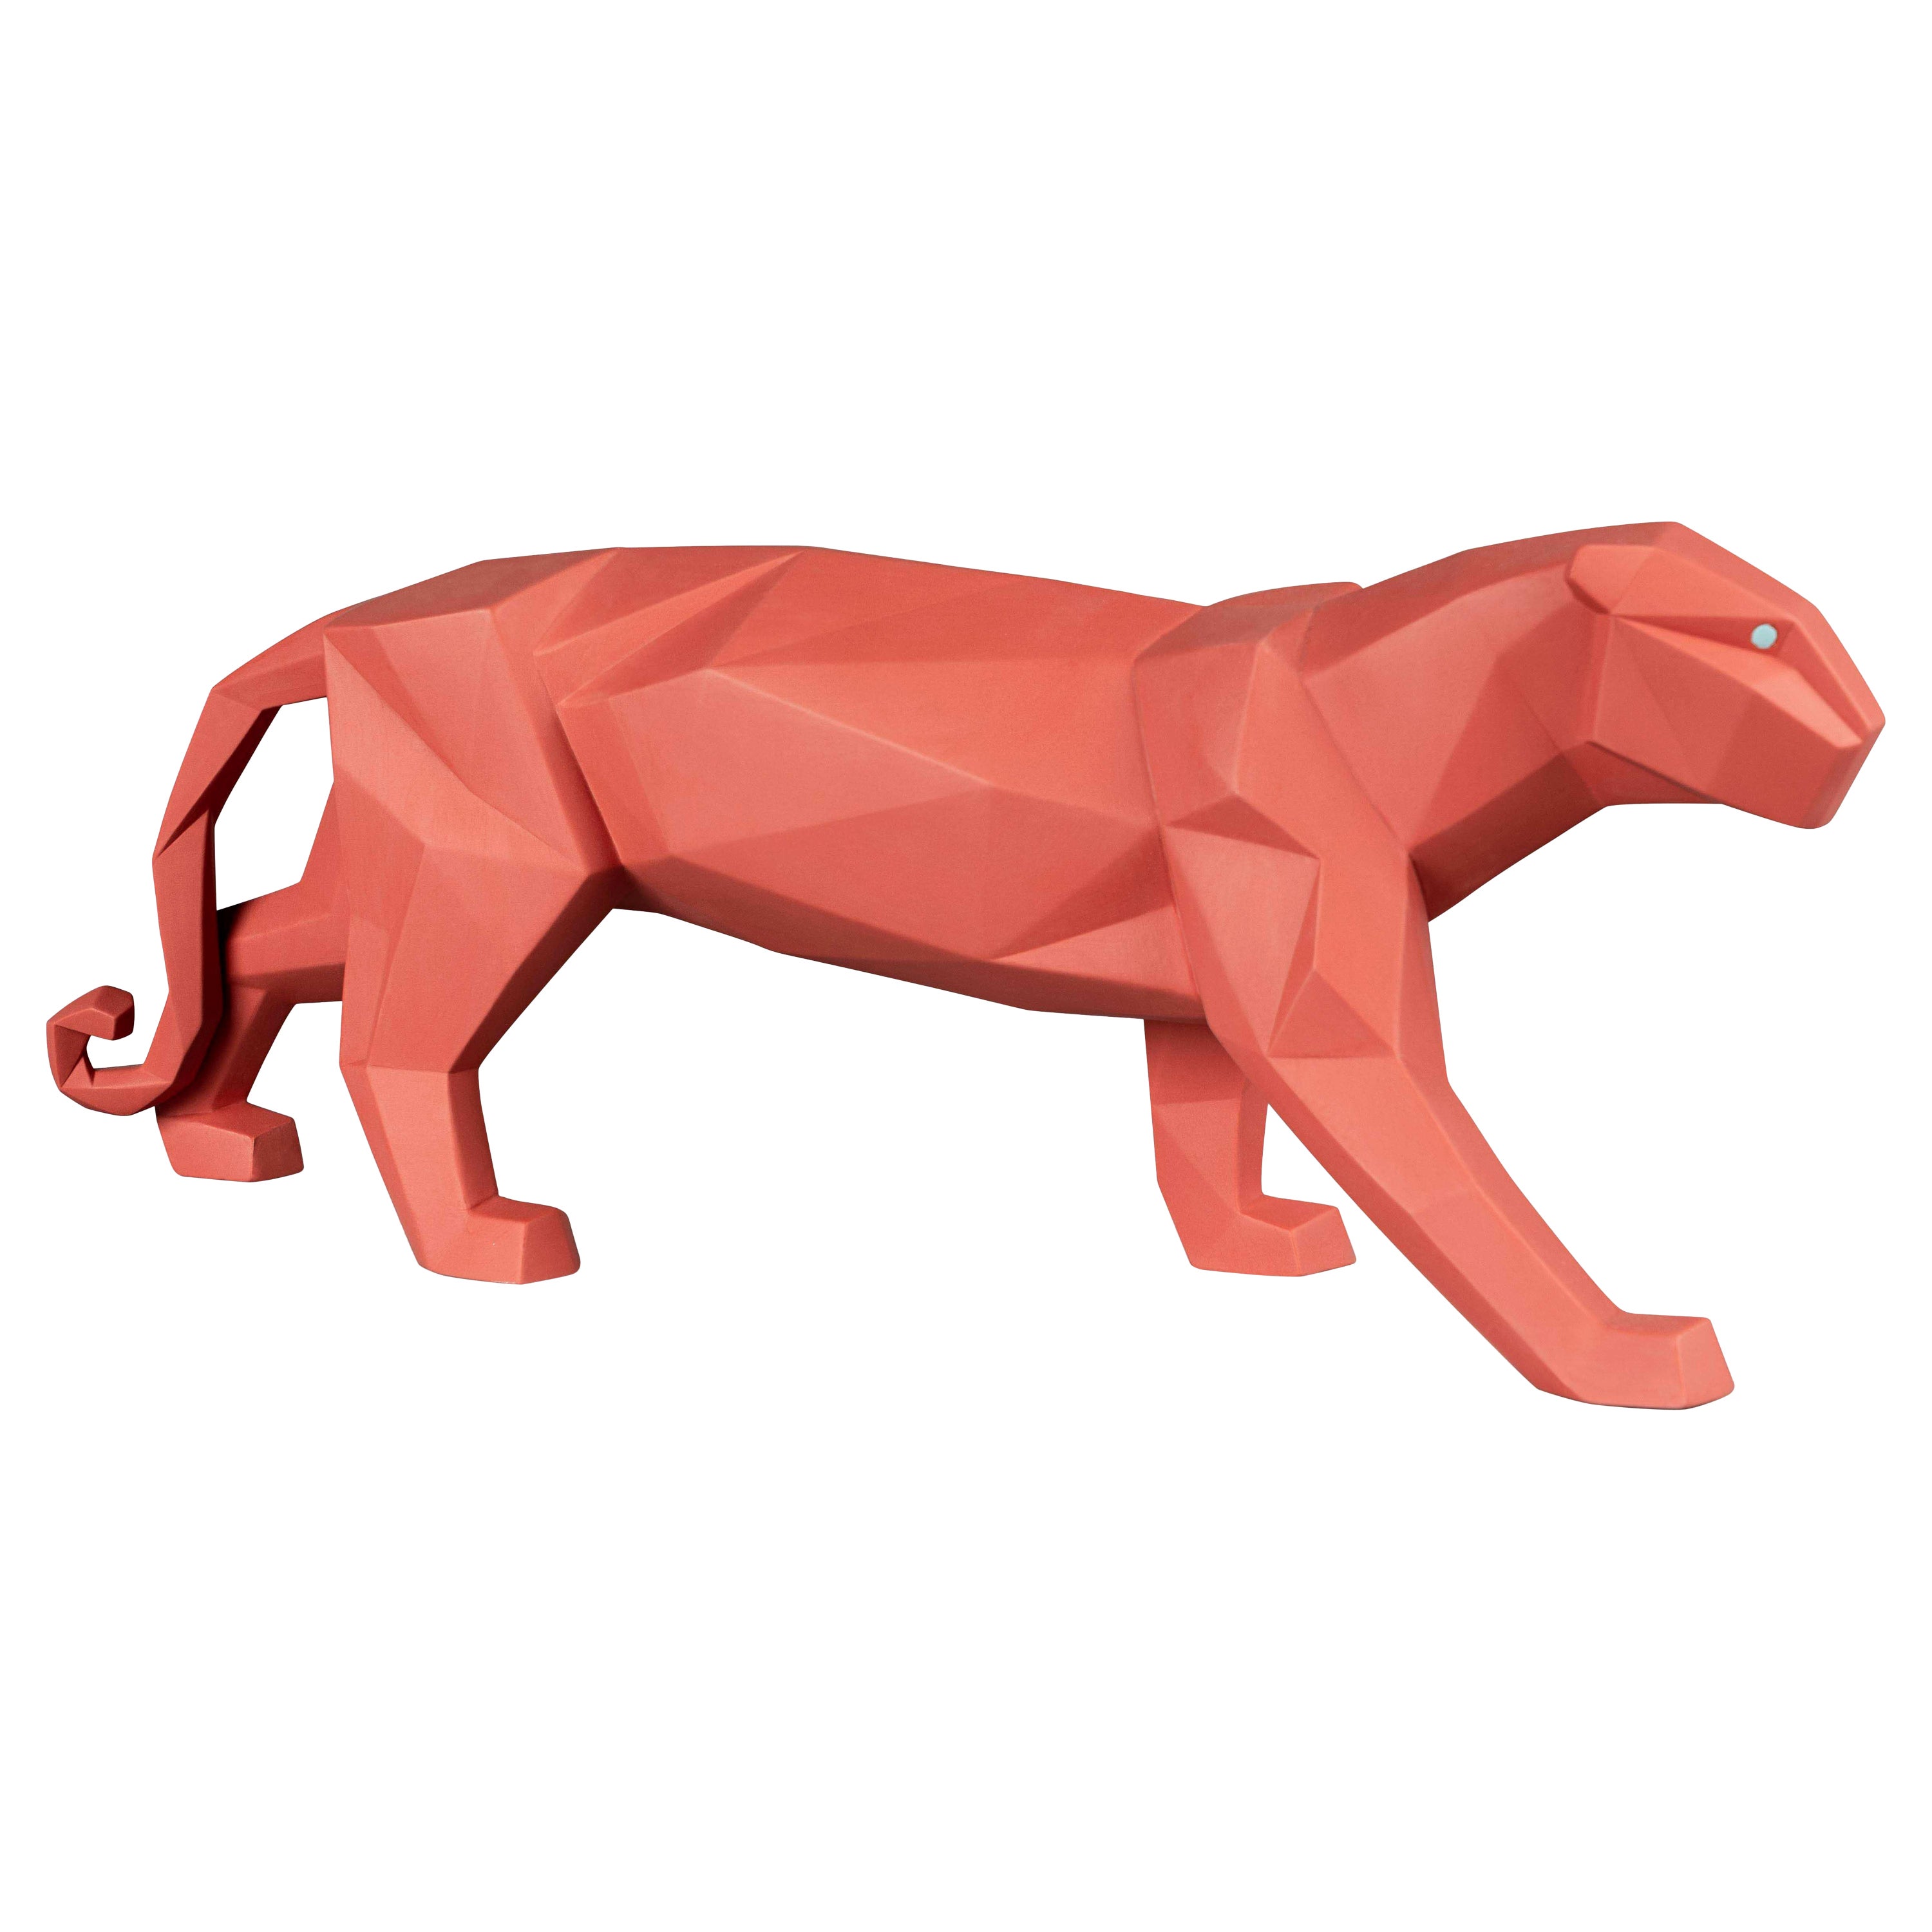 Panther Figurine. Coral matte